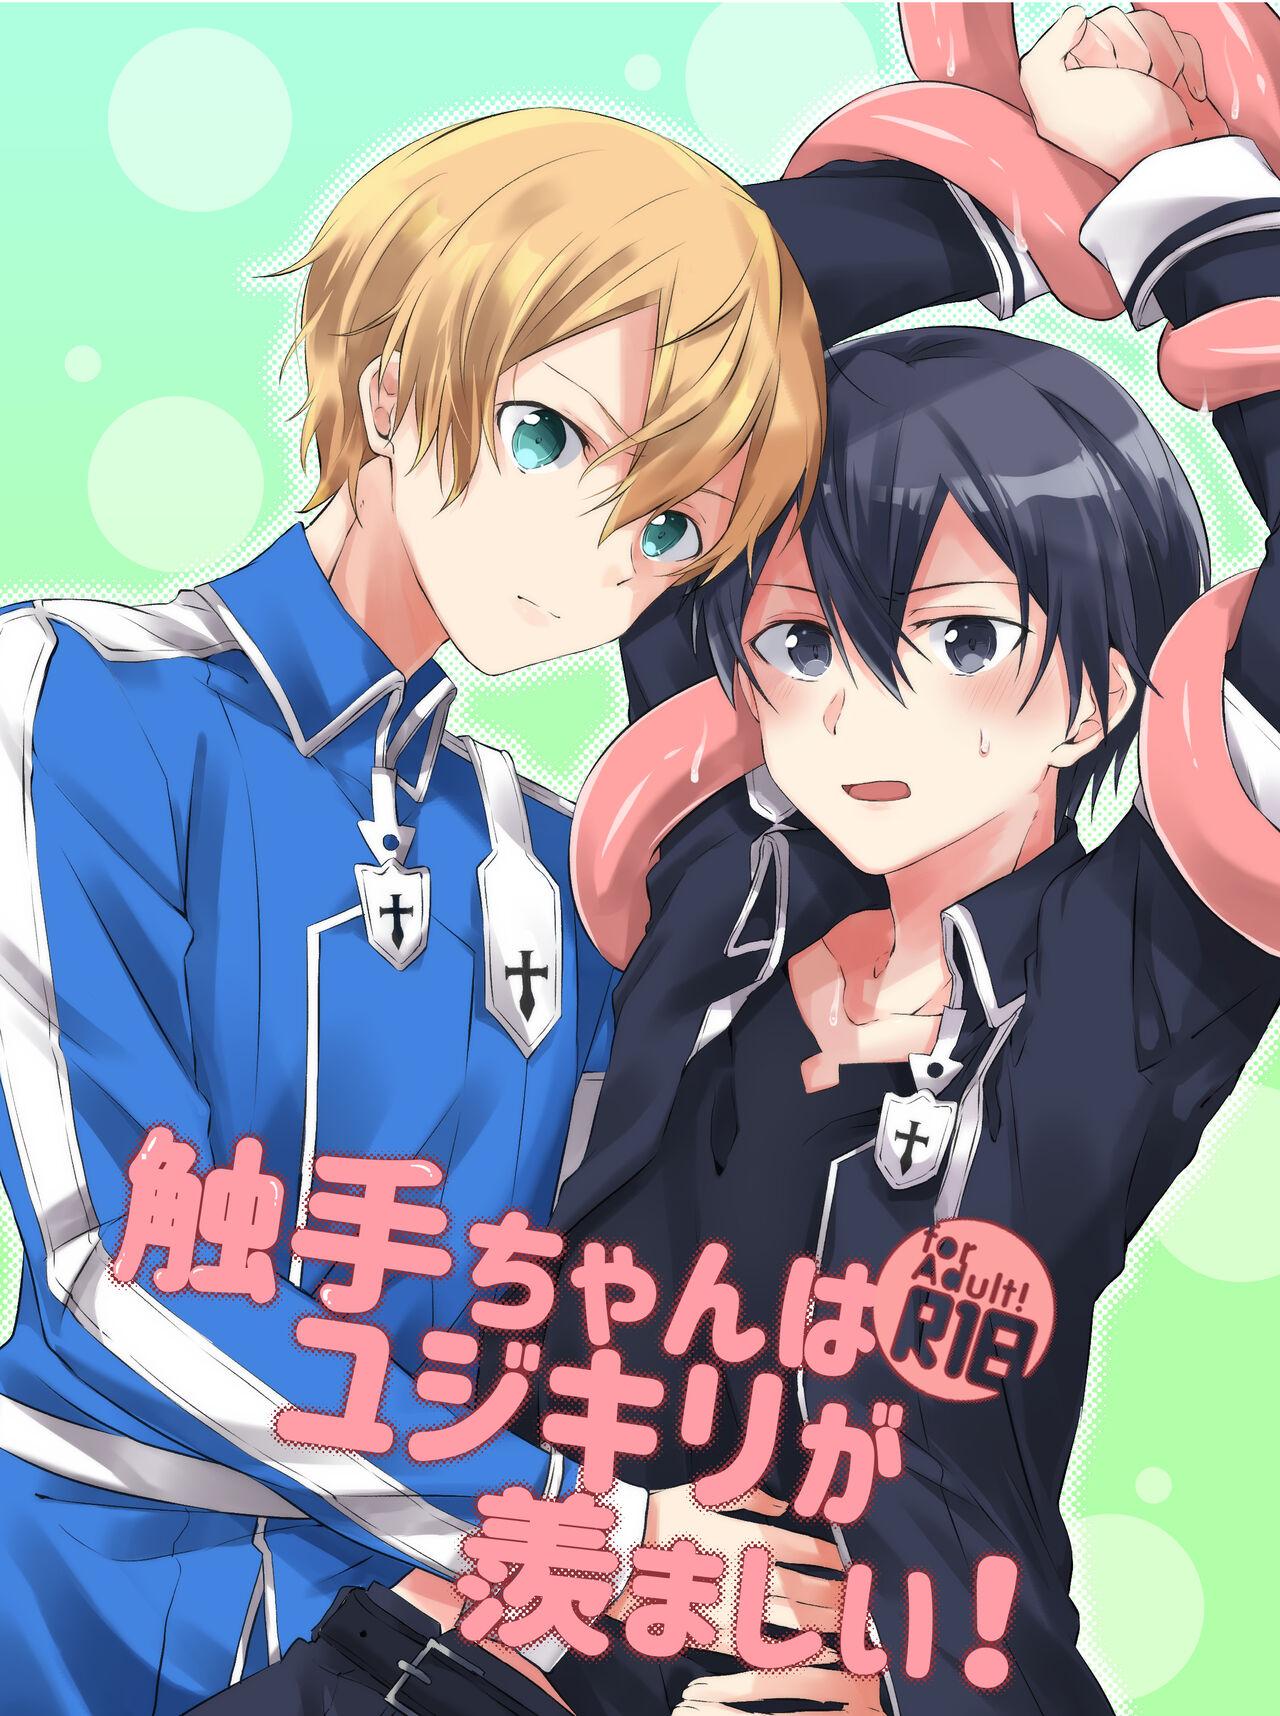 Gay Skinny 触手ちゃんはユジキリが羨ましい！ - Sword art online Pool - Picture 1